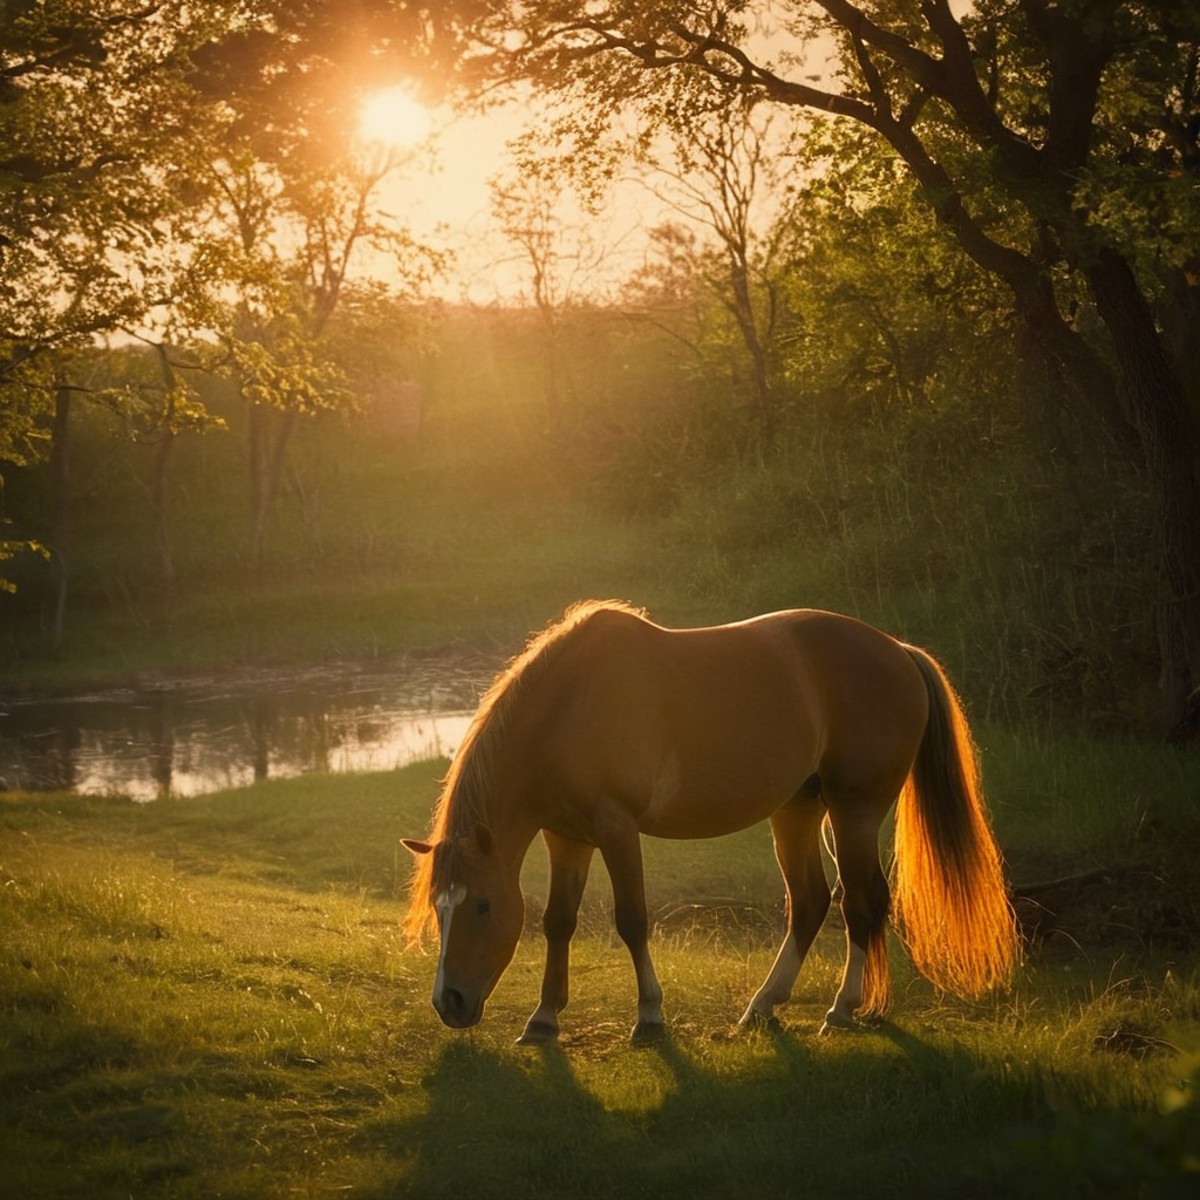 cinematic film still of  <lora:Warm Lighting Style:1>
warm light,a horse is standing in the grass by a stream,warm lightin...